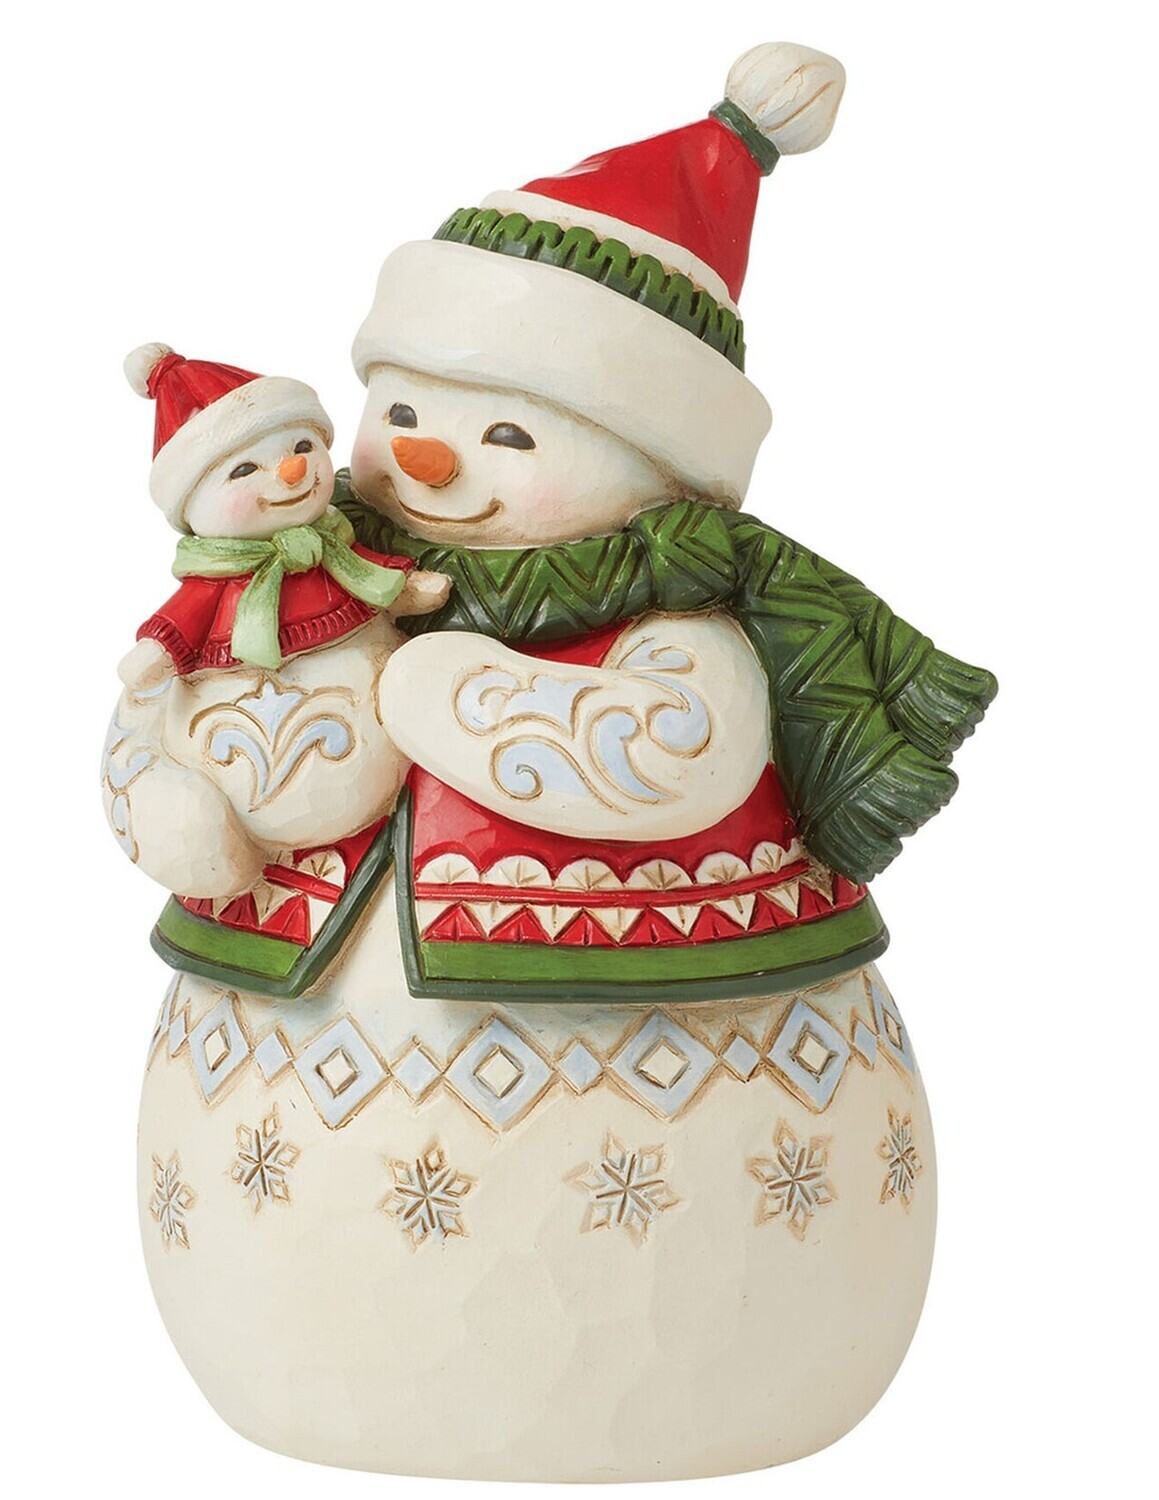 Jim Shore Heartwood Creek "Pint-Sized Snow Mom and Snow Baby" Snowman Figurine 4.9" (6012964)